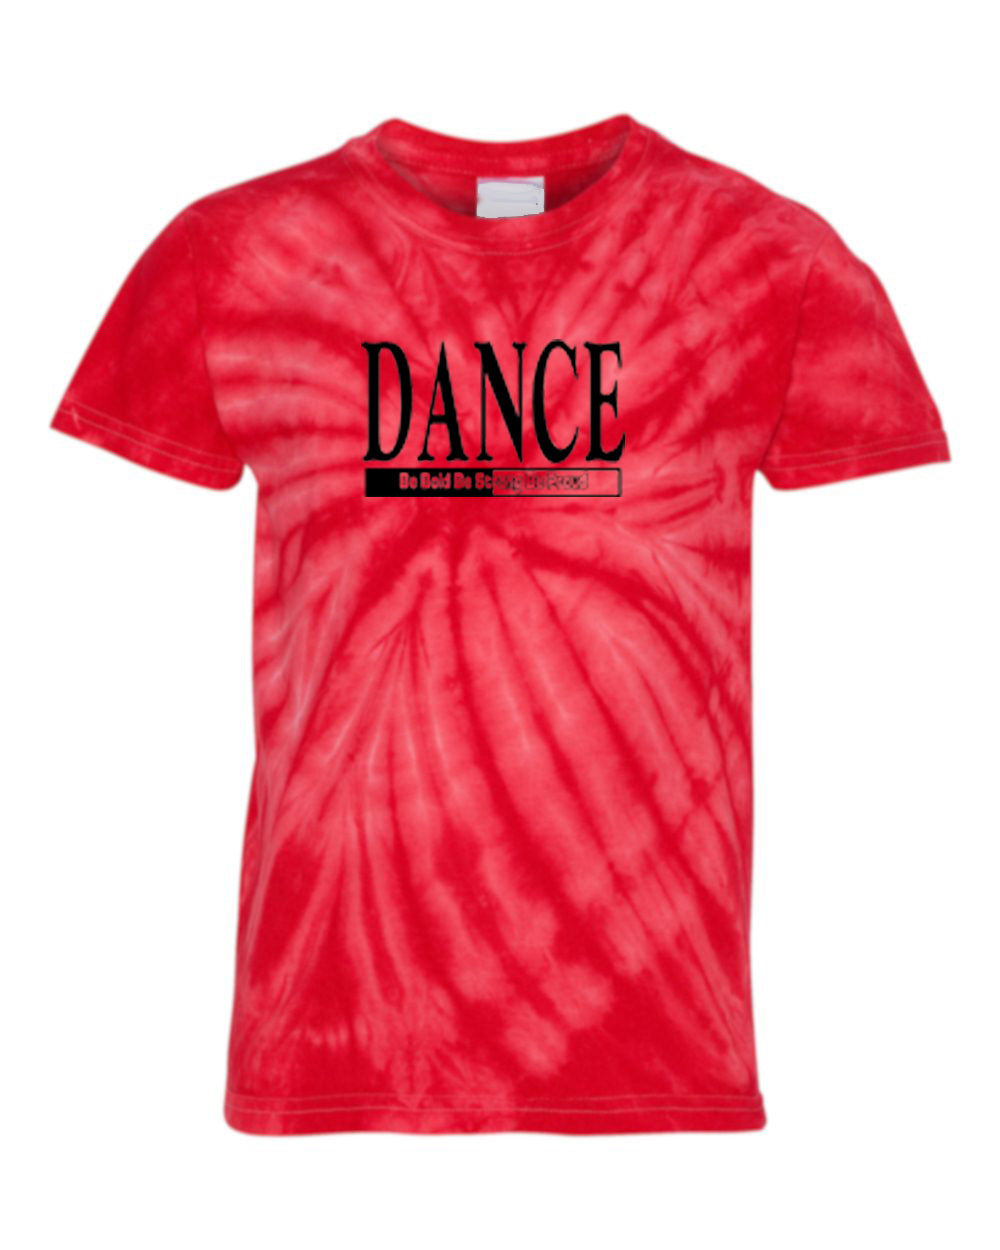 Dance Be Bold Be Strong Be Proud Youth Tie Dye T-Shirt